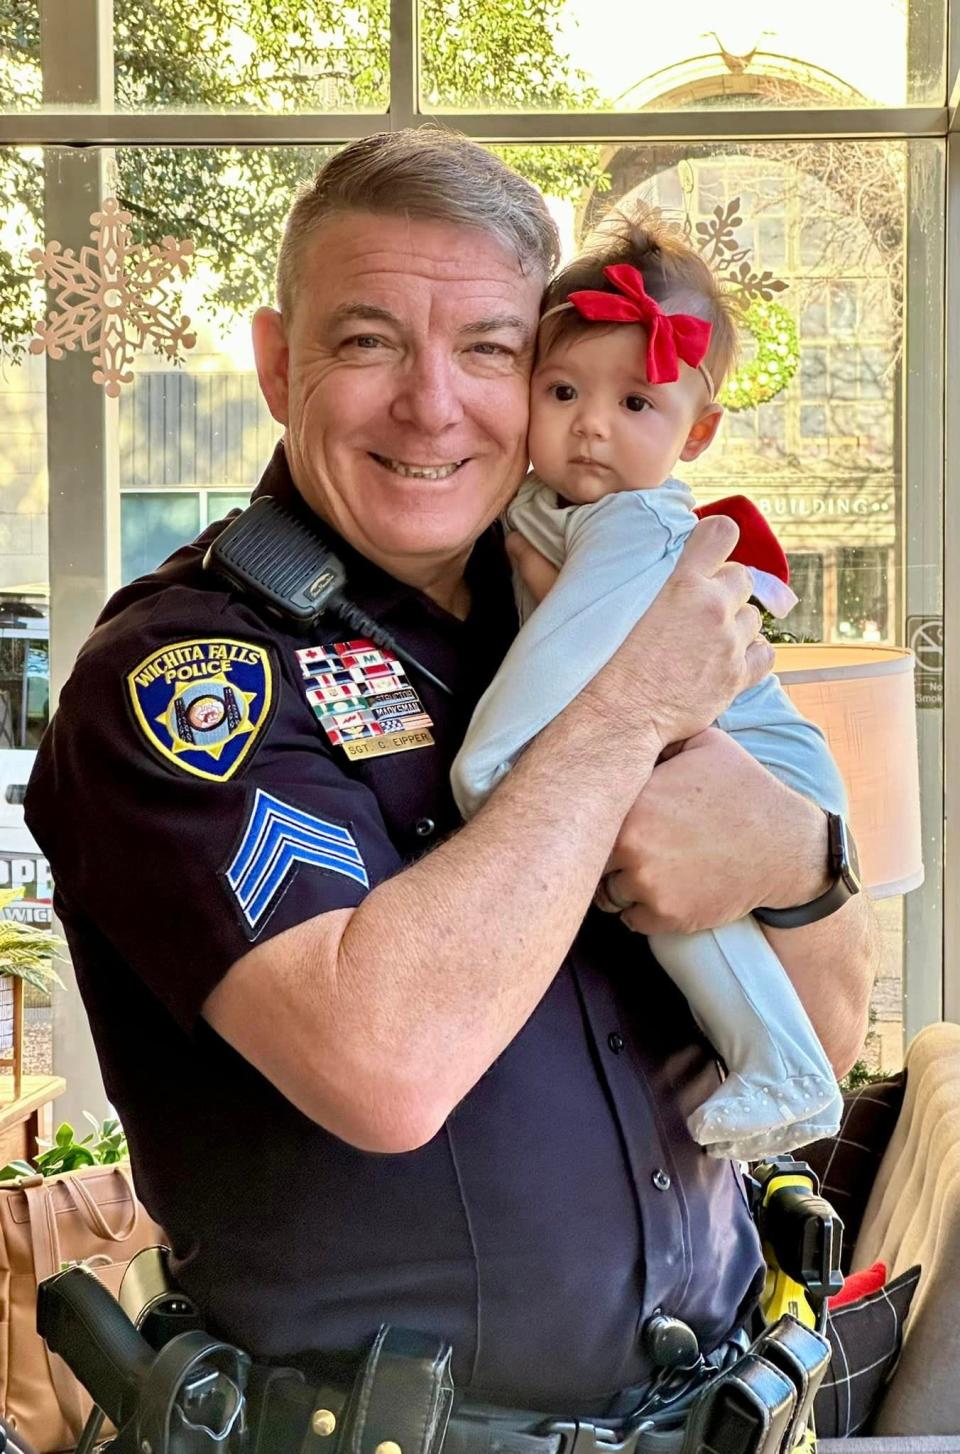 Wichita Falls police Sgt. Charlie Eipper, community services supervisor, holds his seventh grandchild, Emersyn Davis, and her big red bow during a Christmassy Coffee with a Cop event Dec. 16 at 8th Street Coffeehouse downtown. Emersyn is the daughter of Zach and Brianna Davis.